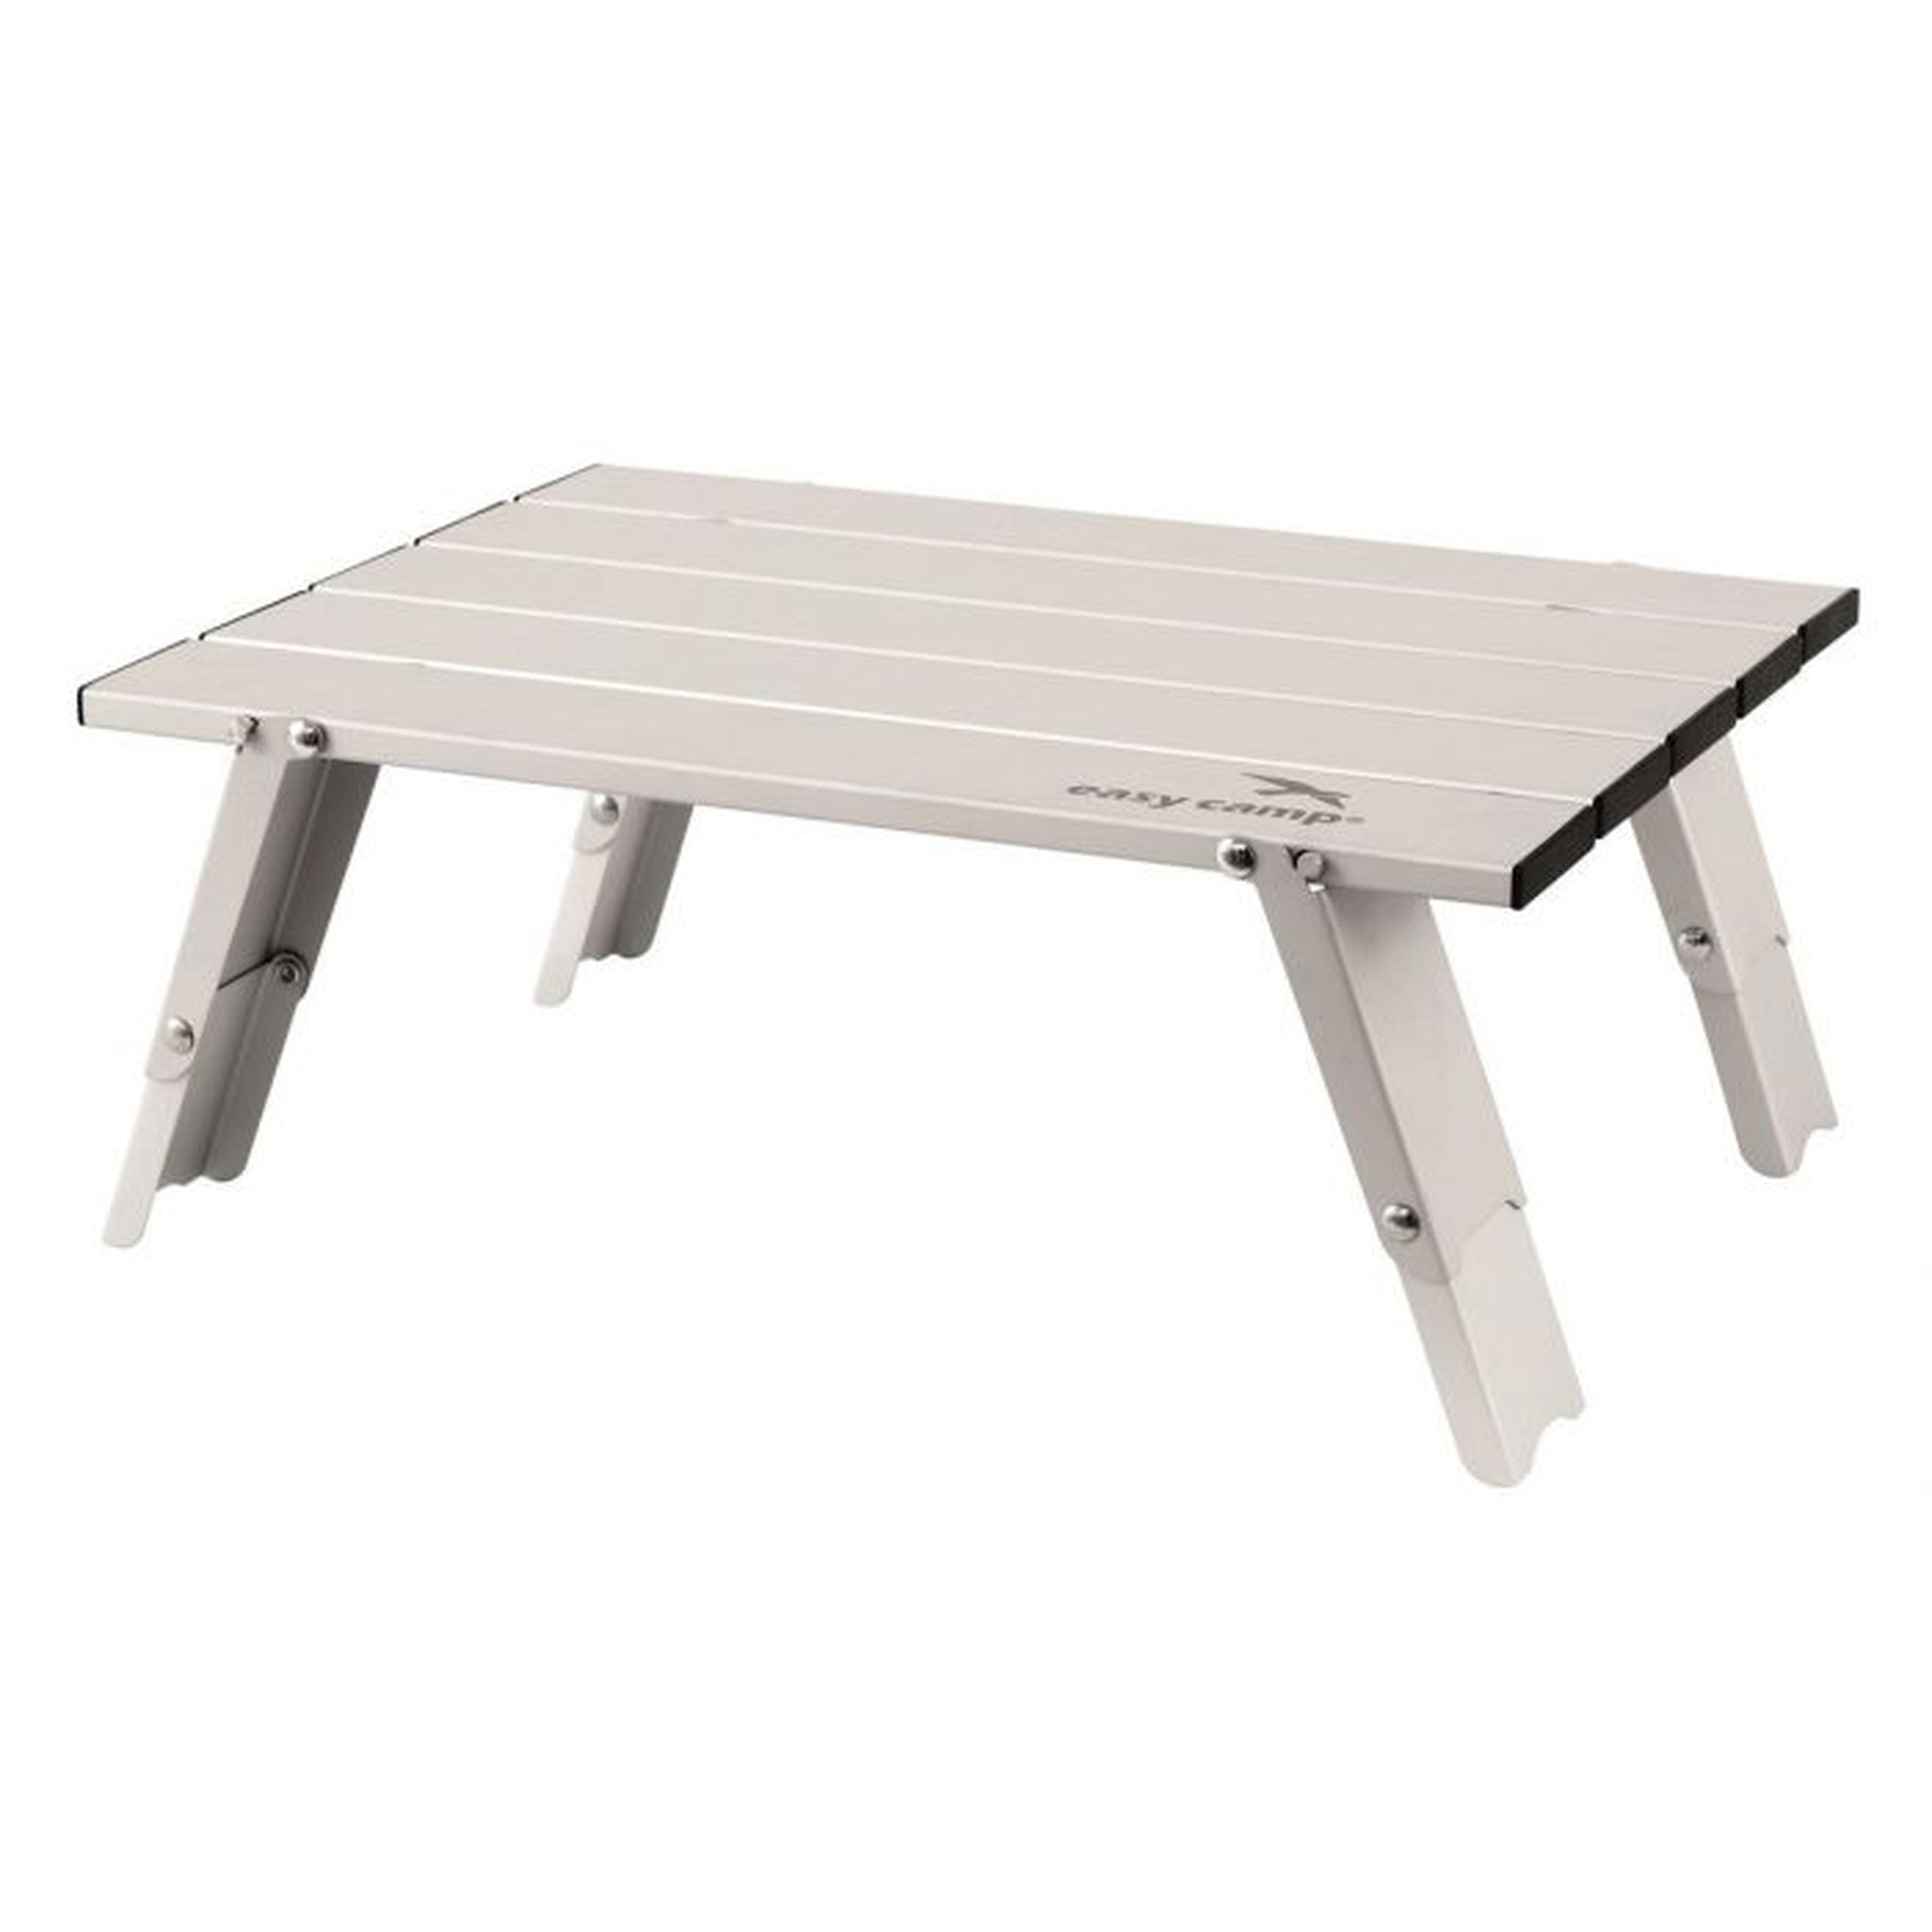 Easy camp angers lightweight camping table